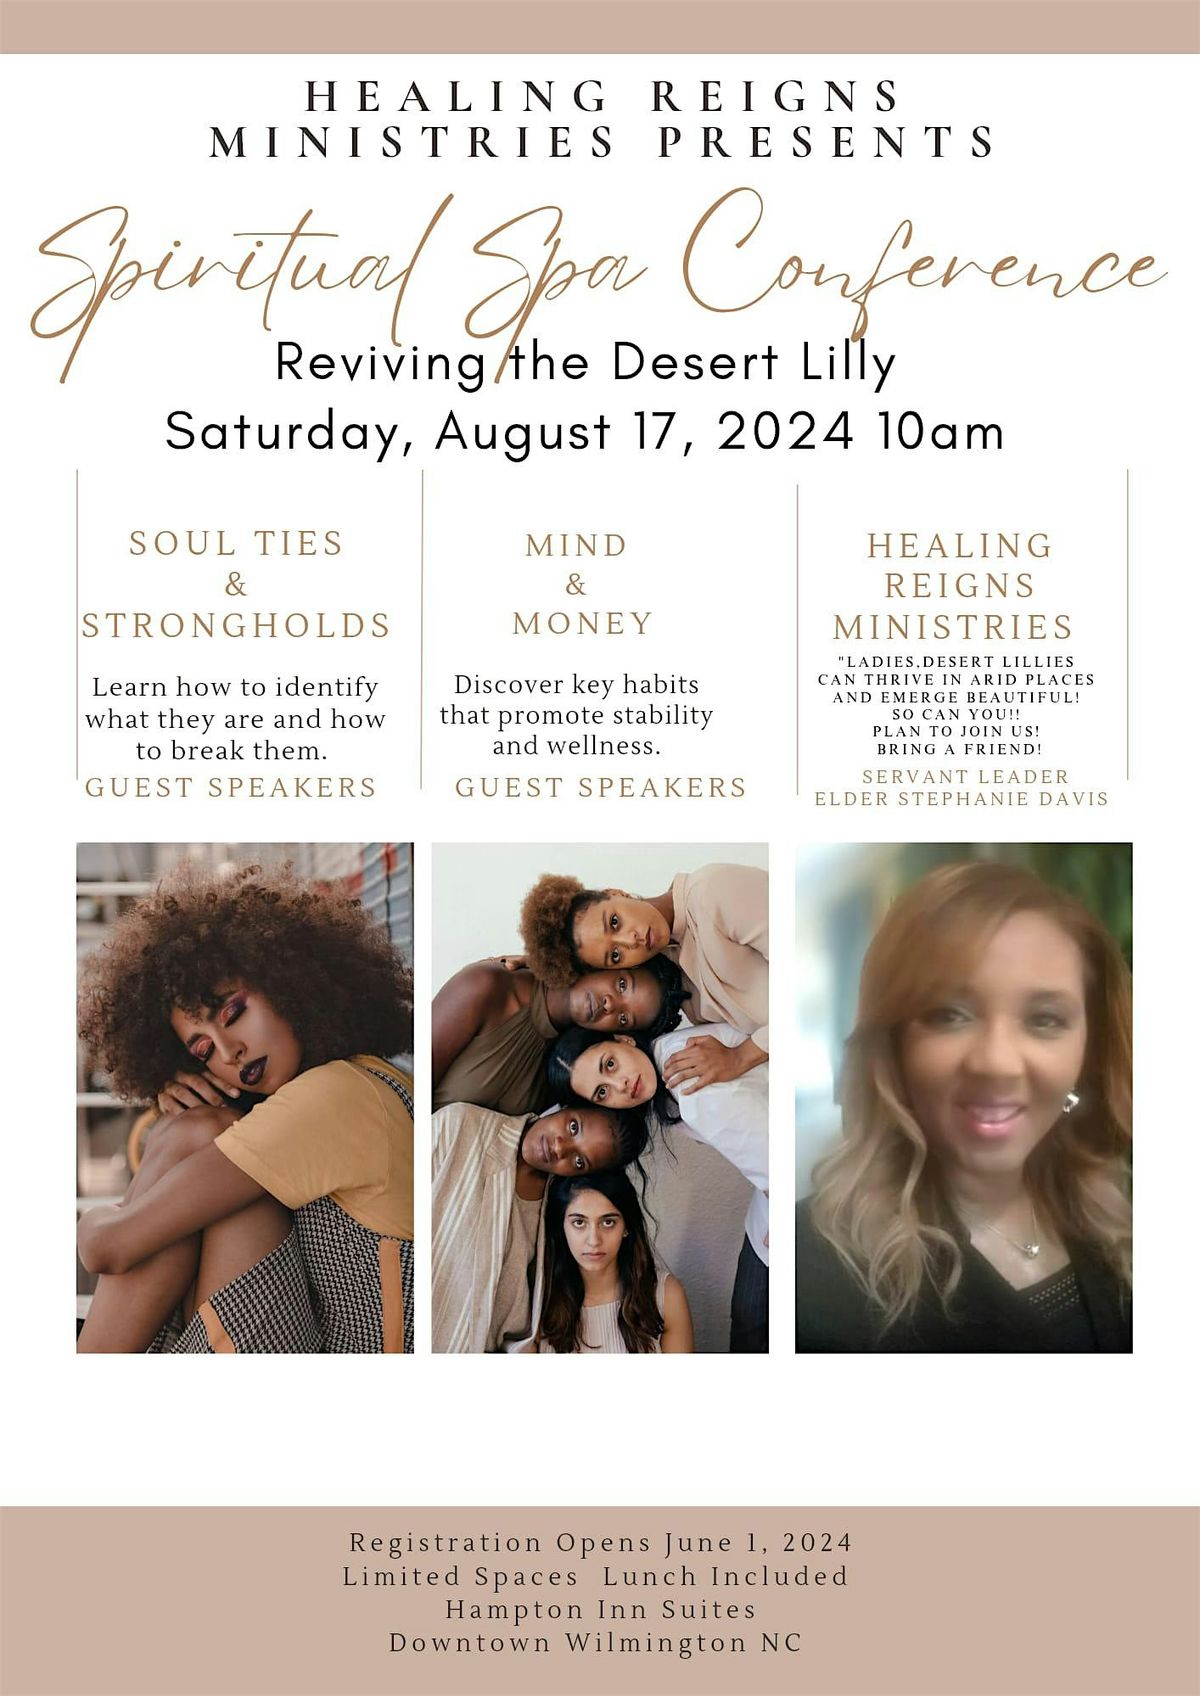 Spiritual Spa Conference "Reviving the Desert Lilly"